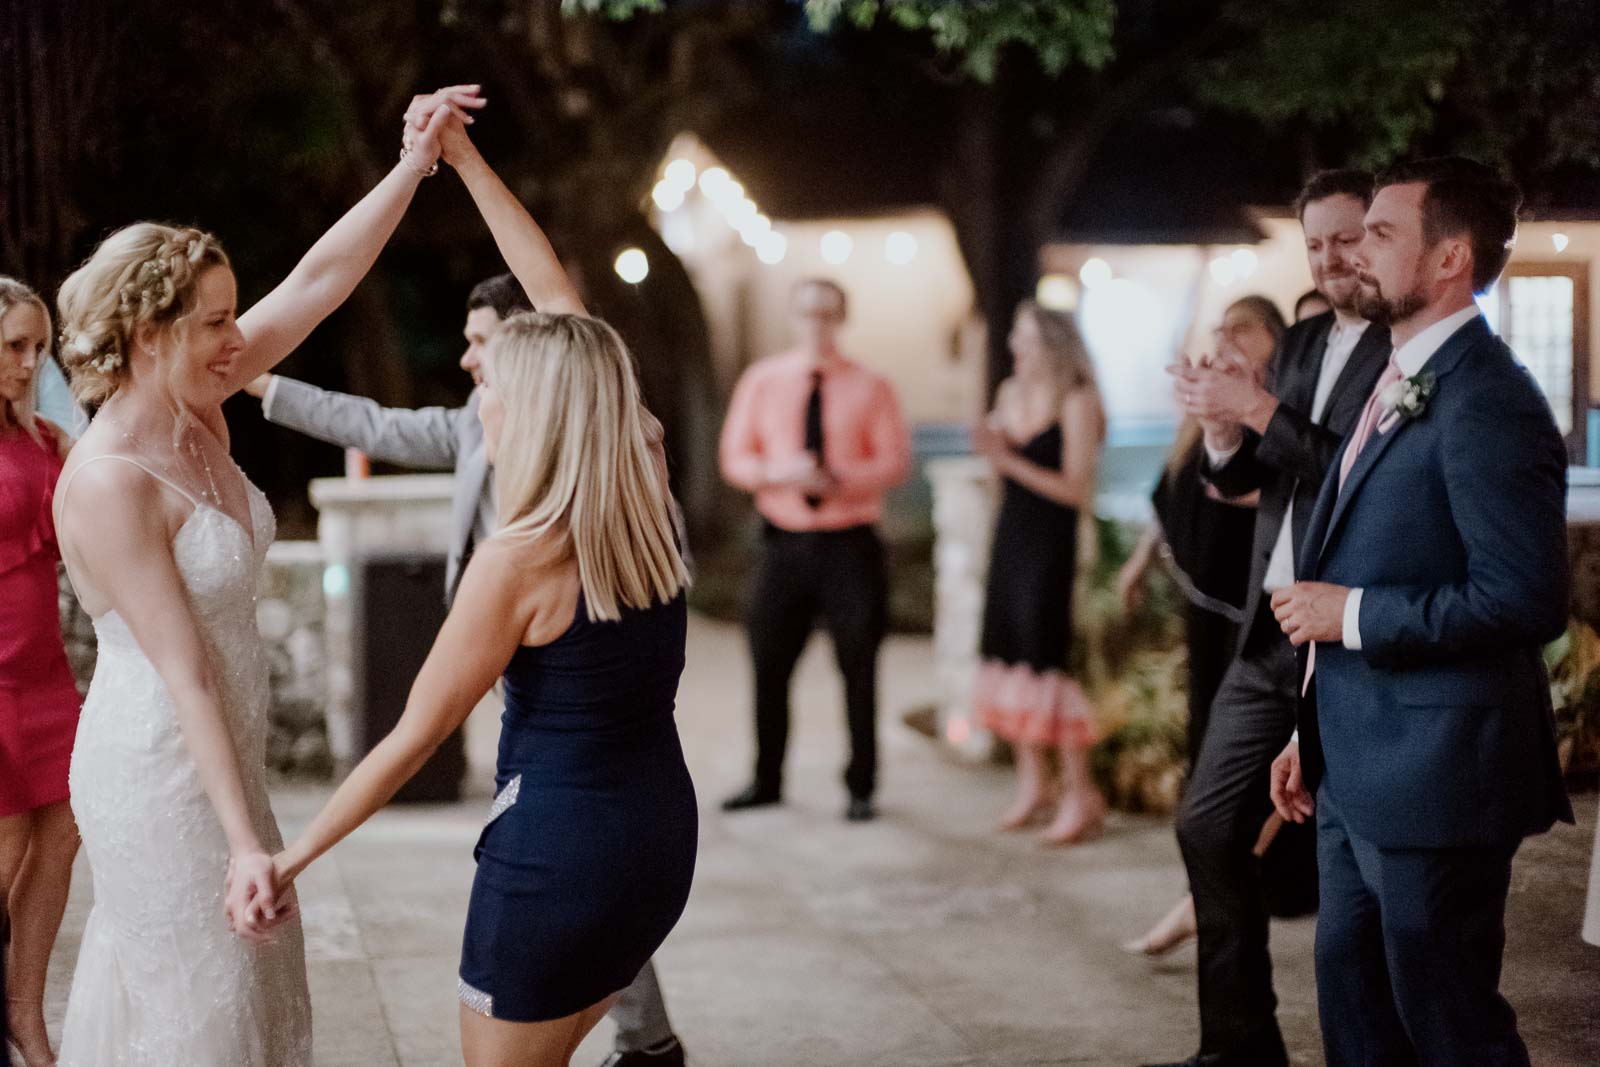 Groom looks on his bride as she dances with a guest